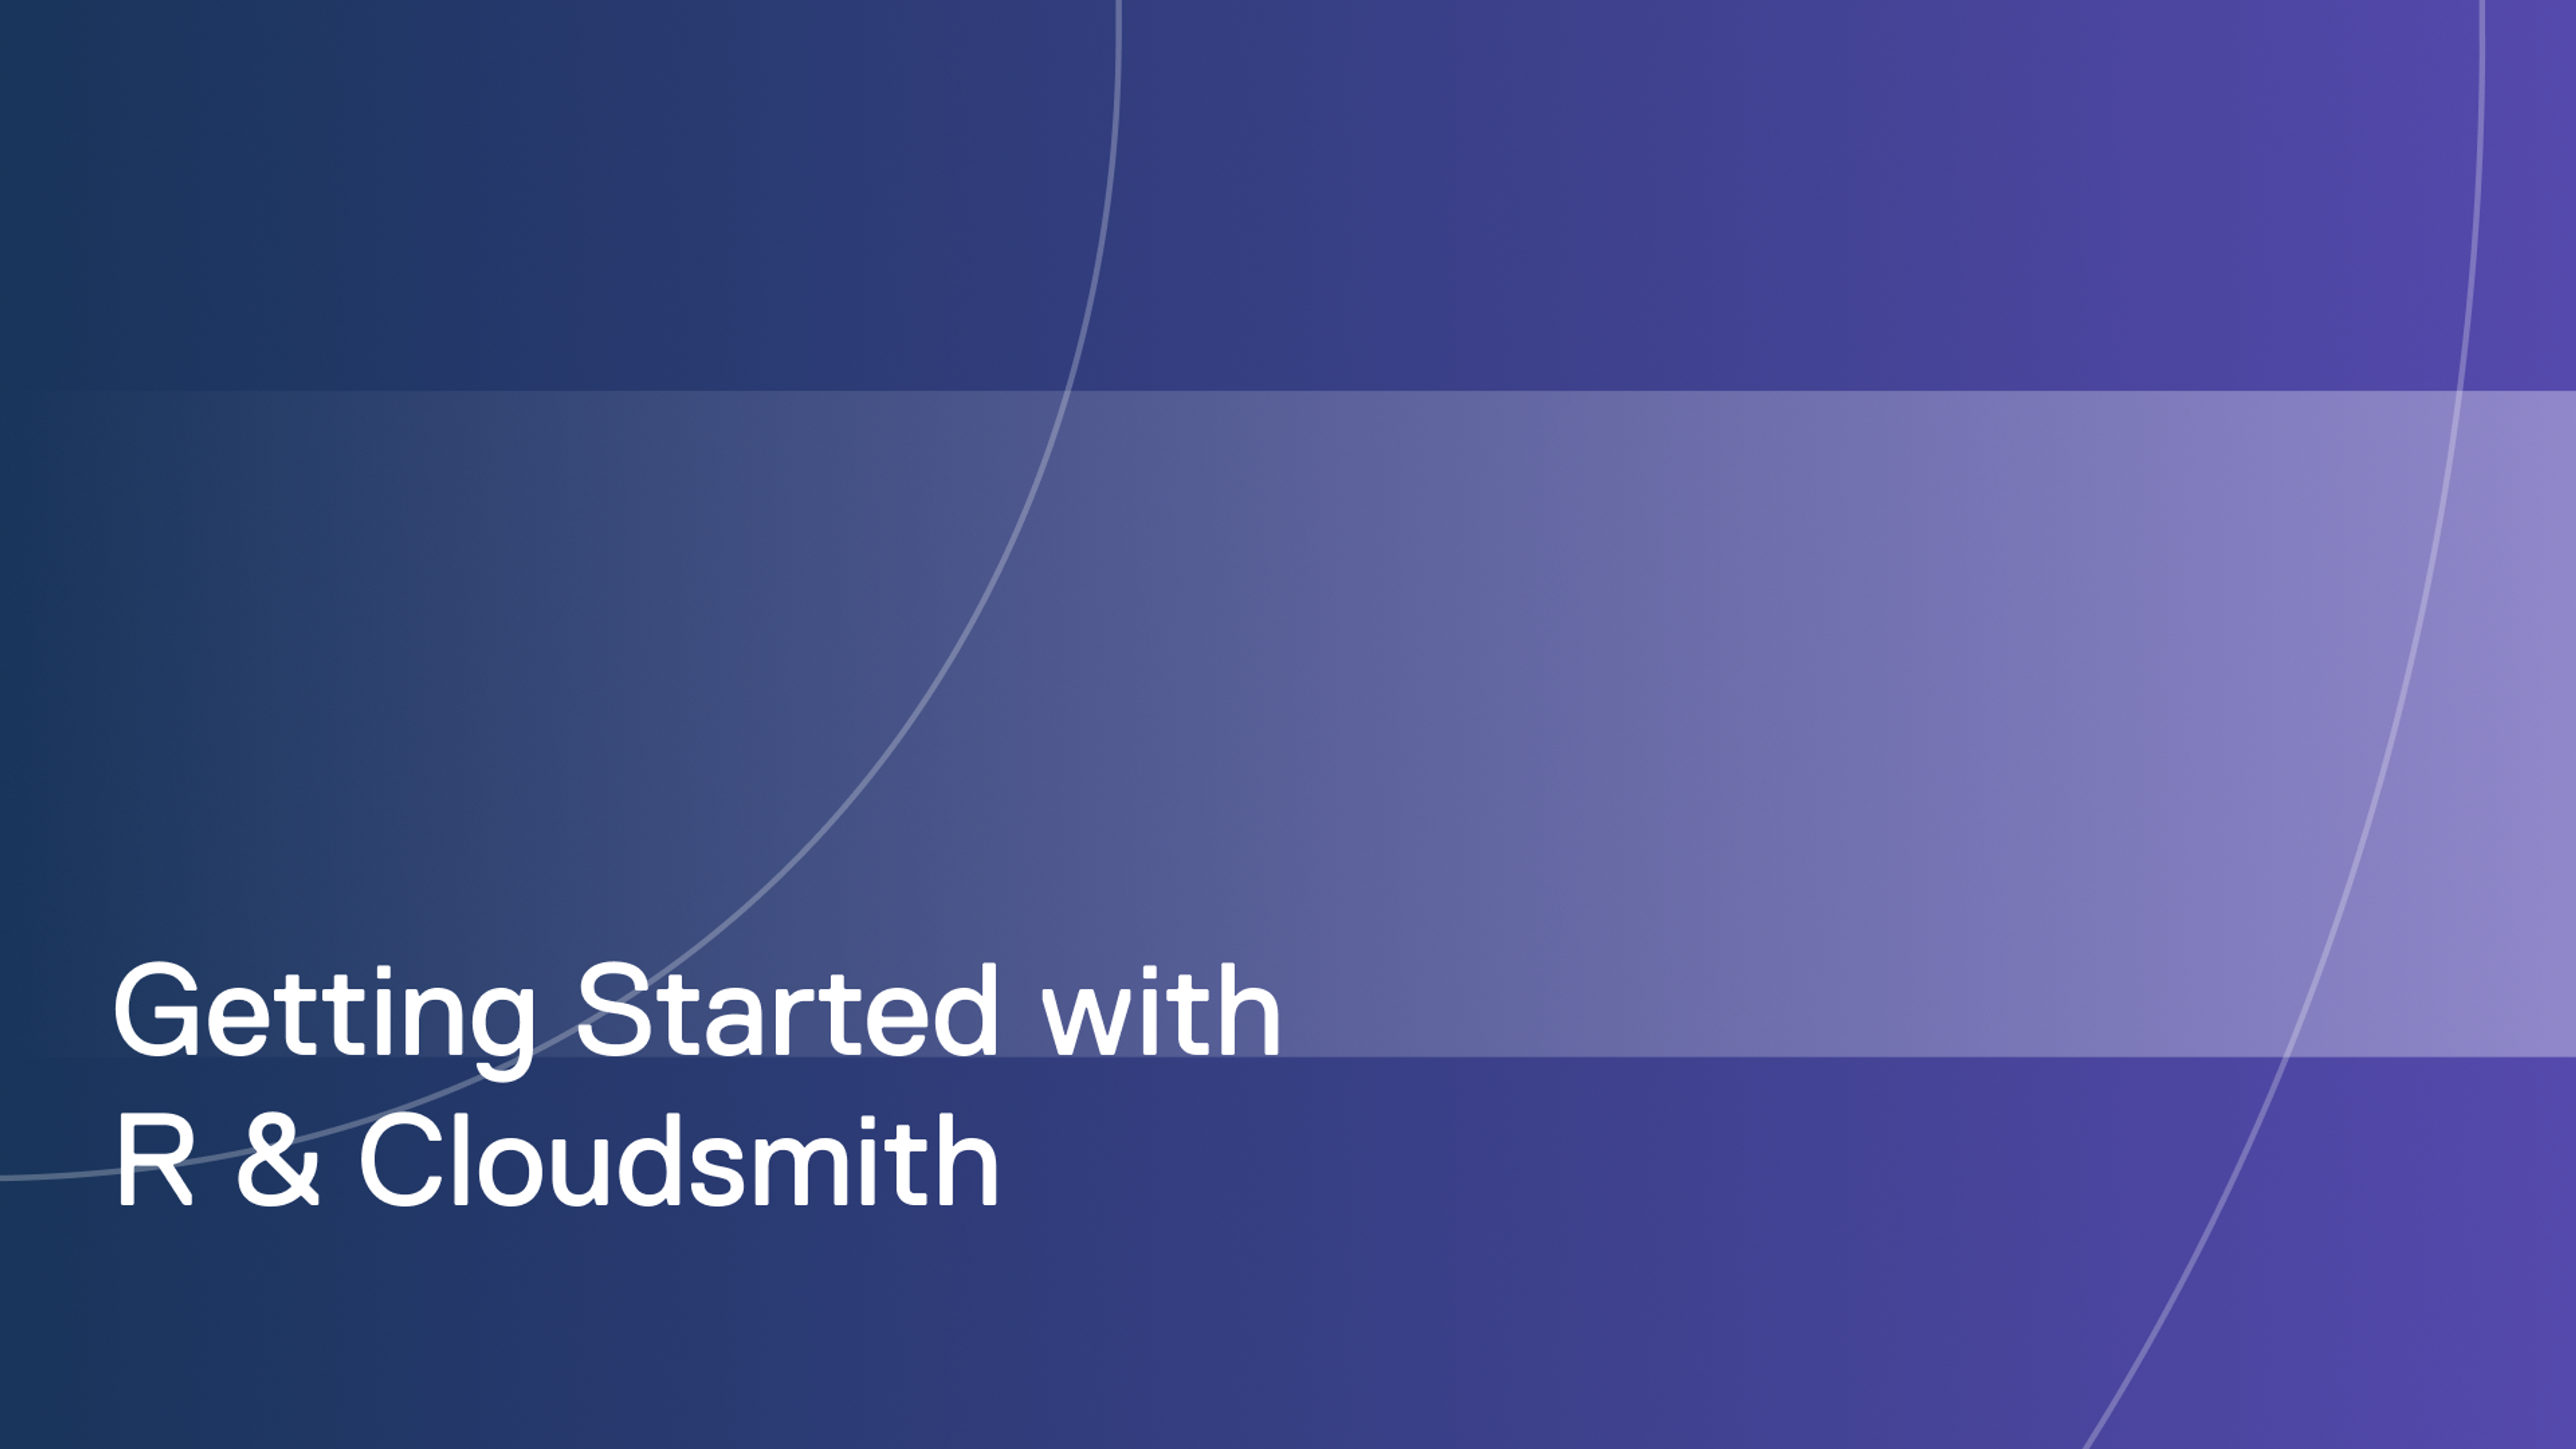 Getting Started with R on Cloudsmith